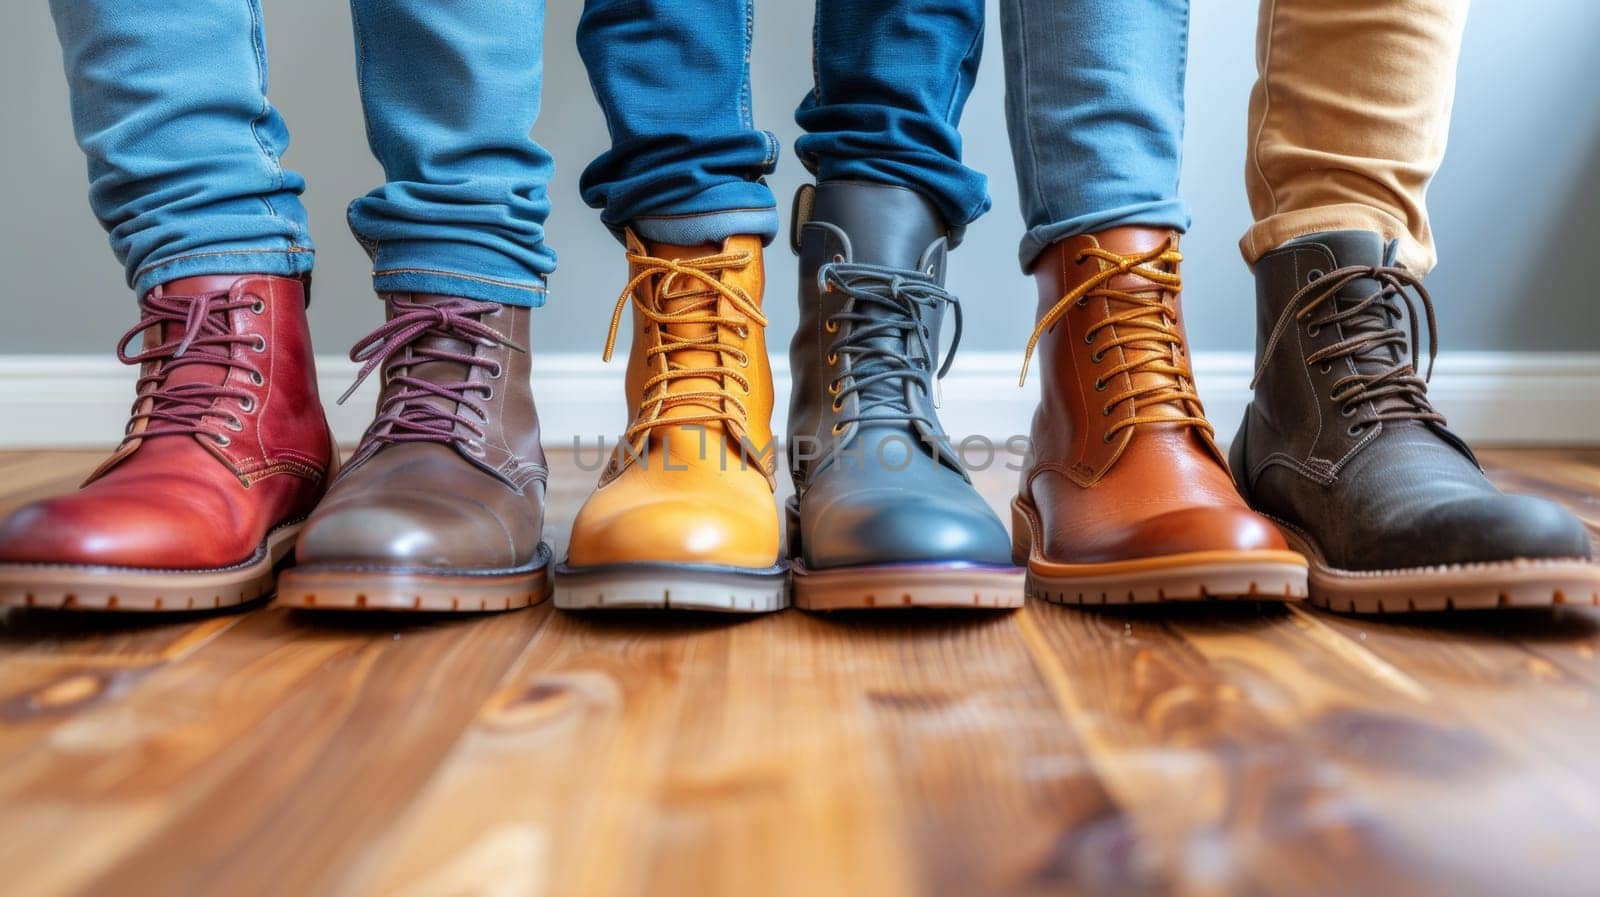 A group of people wearing different colored boots standing on a hardwood floor, AI by starush